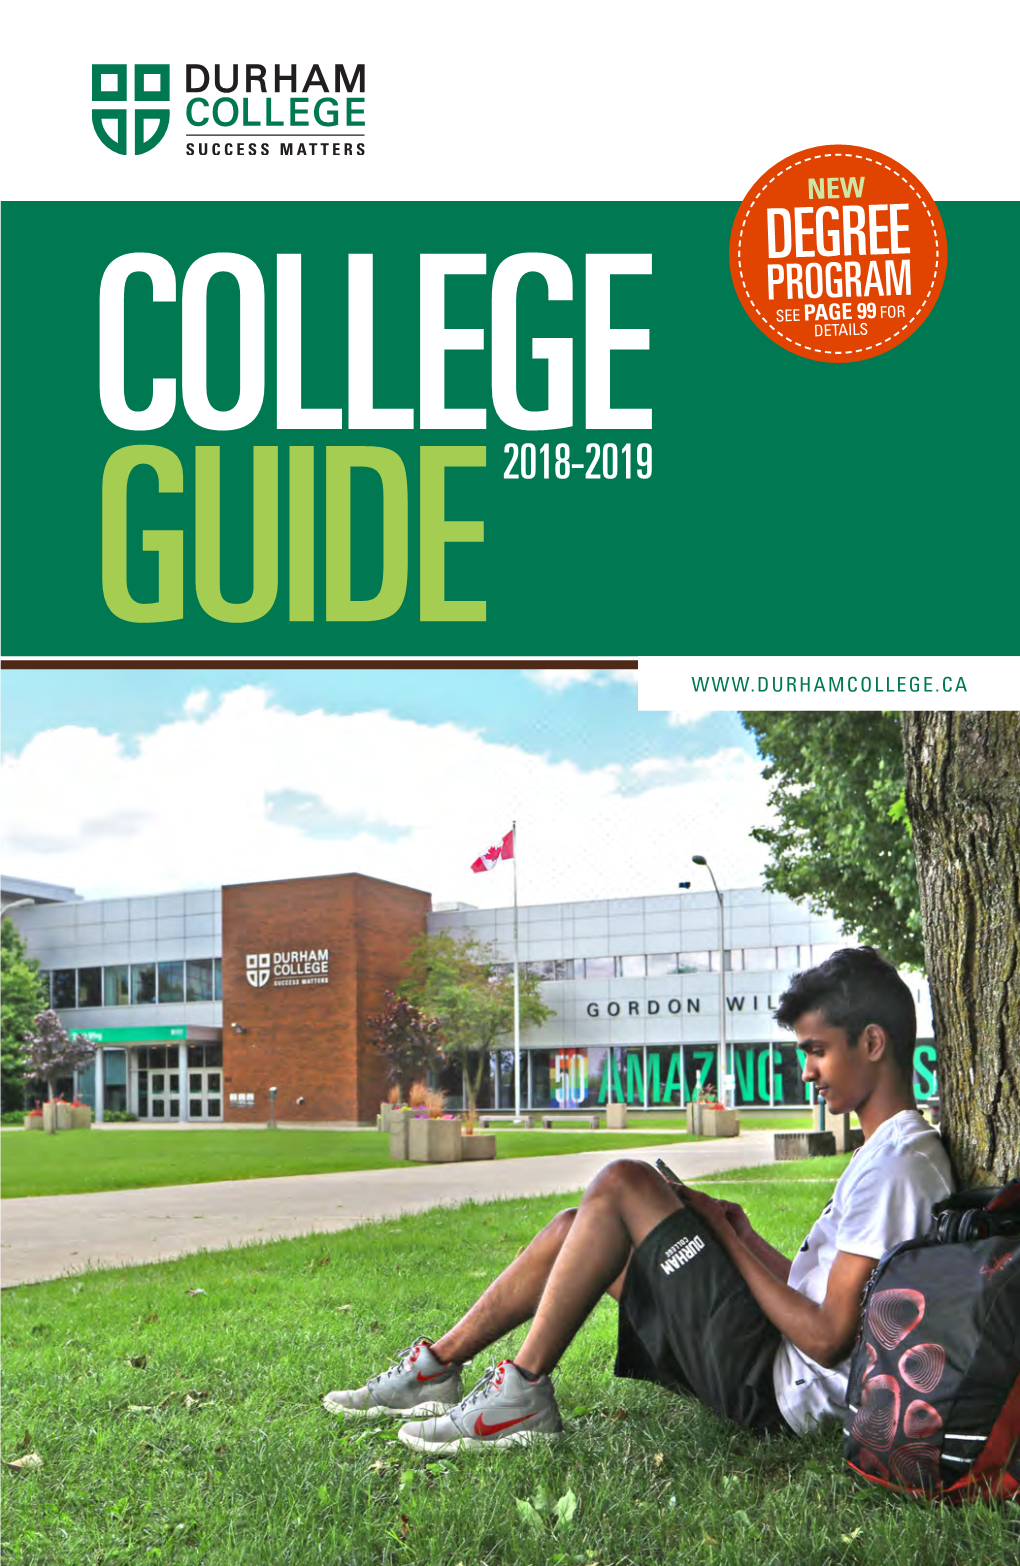 Degree Program See Page 99 for College Details Guide 2018-2019 Table of Contents